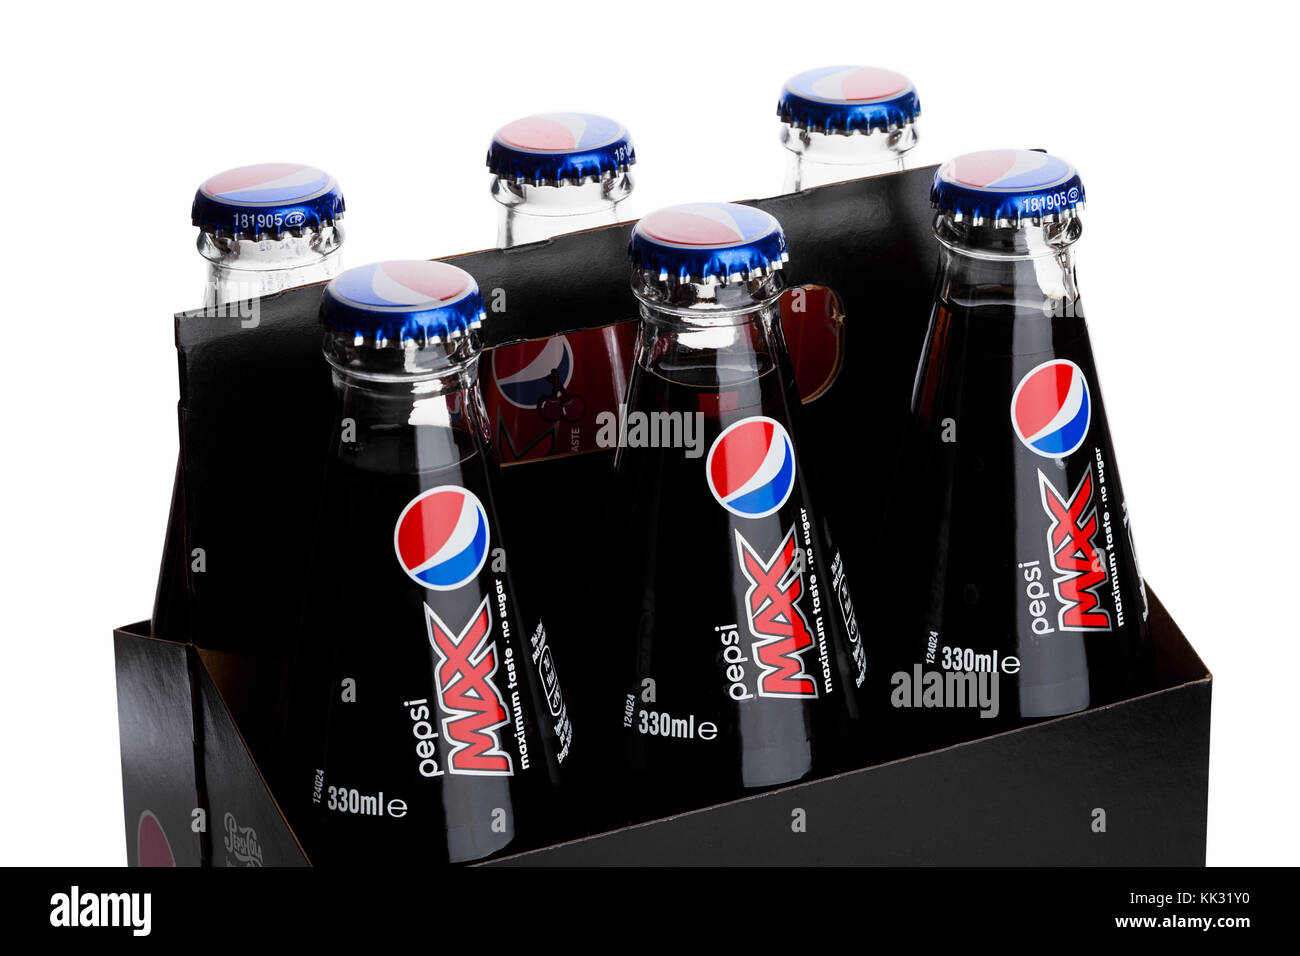 LONDON, UK - November 24, 2017: Pax of six with glass Bottle of Pepsi Cola soft drink on white background.American multinational food and beverage com Stock Photo